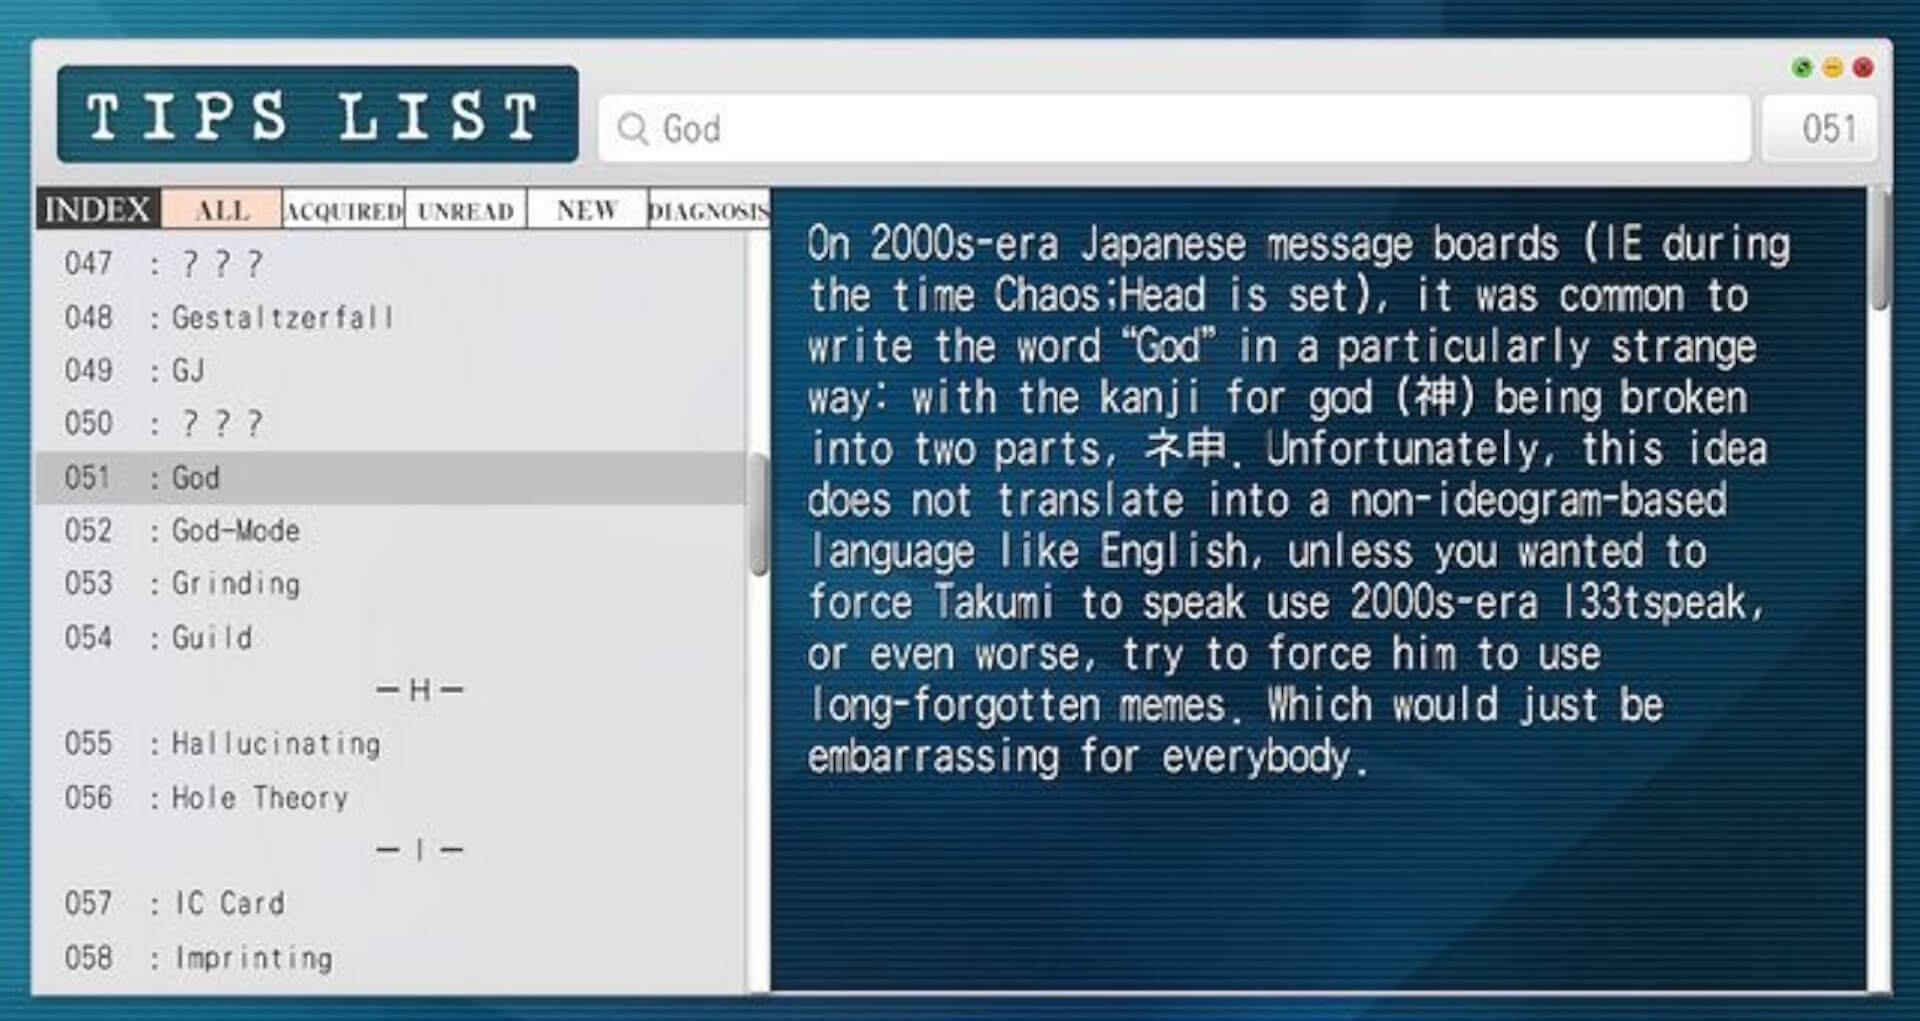 An image showing the translation of Chaos;Head Noah and the translators' decision not to translate the slang "God", which was written in a certain way in 2000s-era Japanese forums